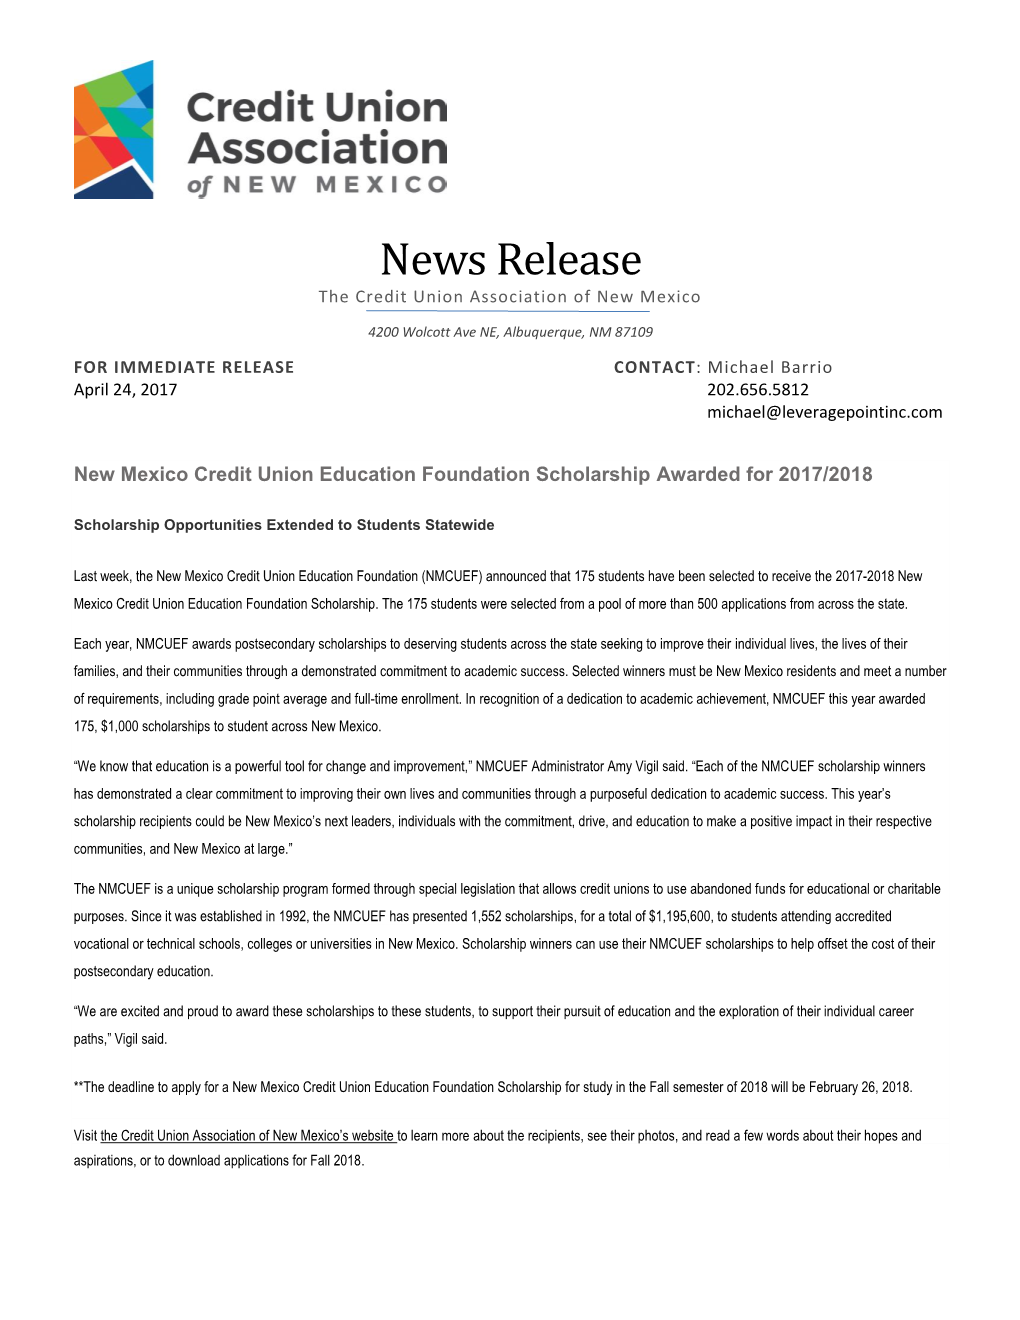 News Release the Credit Union Association of New Mexico